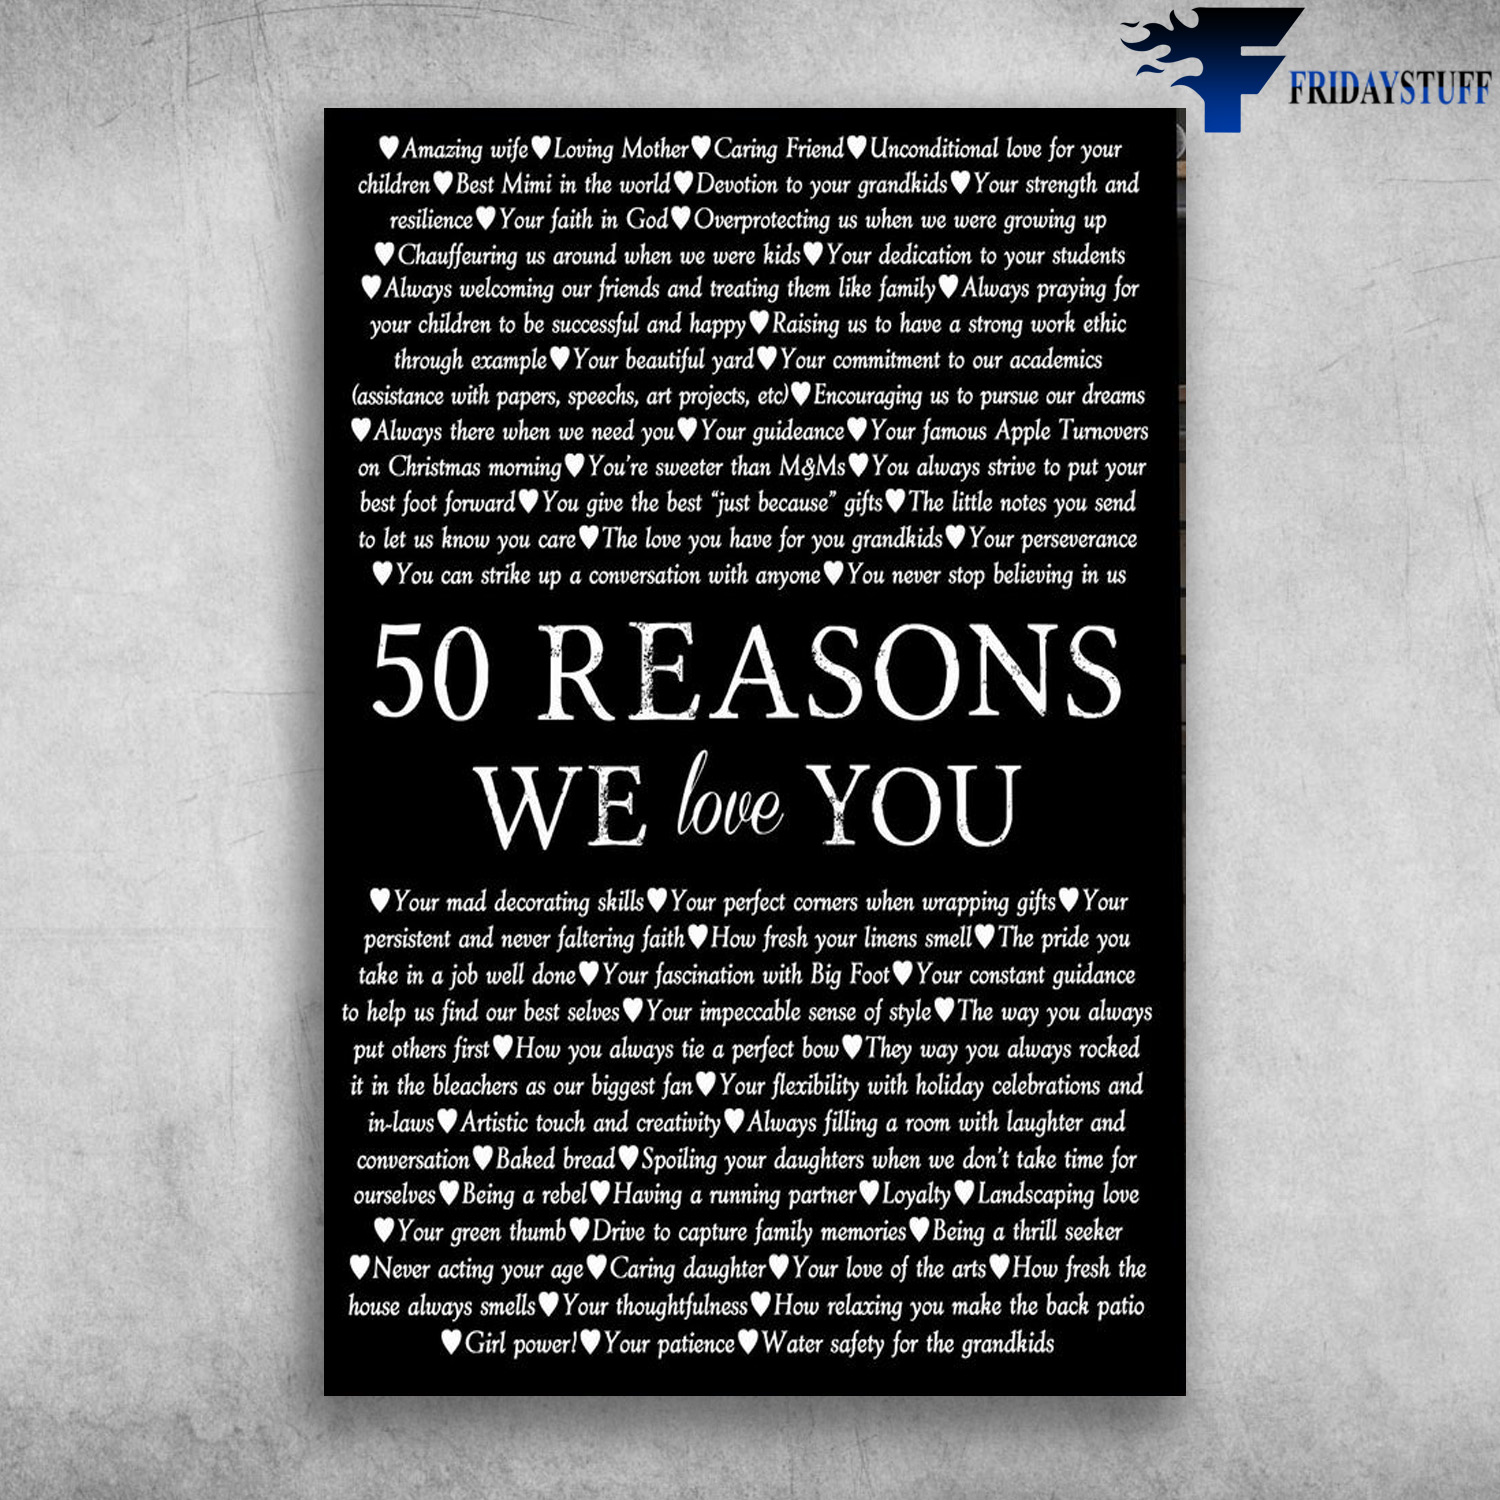 50 Reasons We Love You - Amazing Wife, Loving Mother, Caring Friend, Unconditional Love For Your Children, Best Mimi In The World, Devotion To Your Grandkids, Your Strength And Resiliencem Your Faith In God